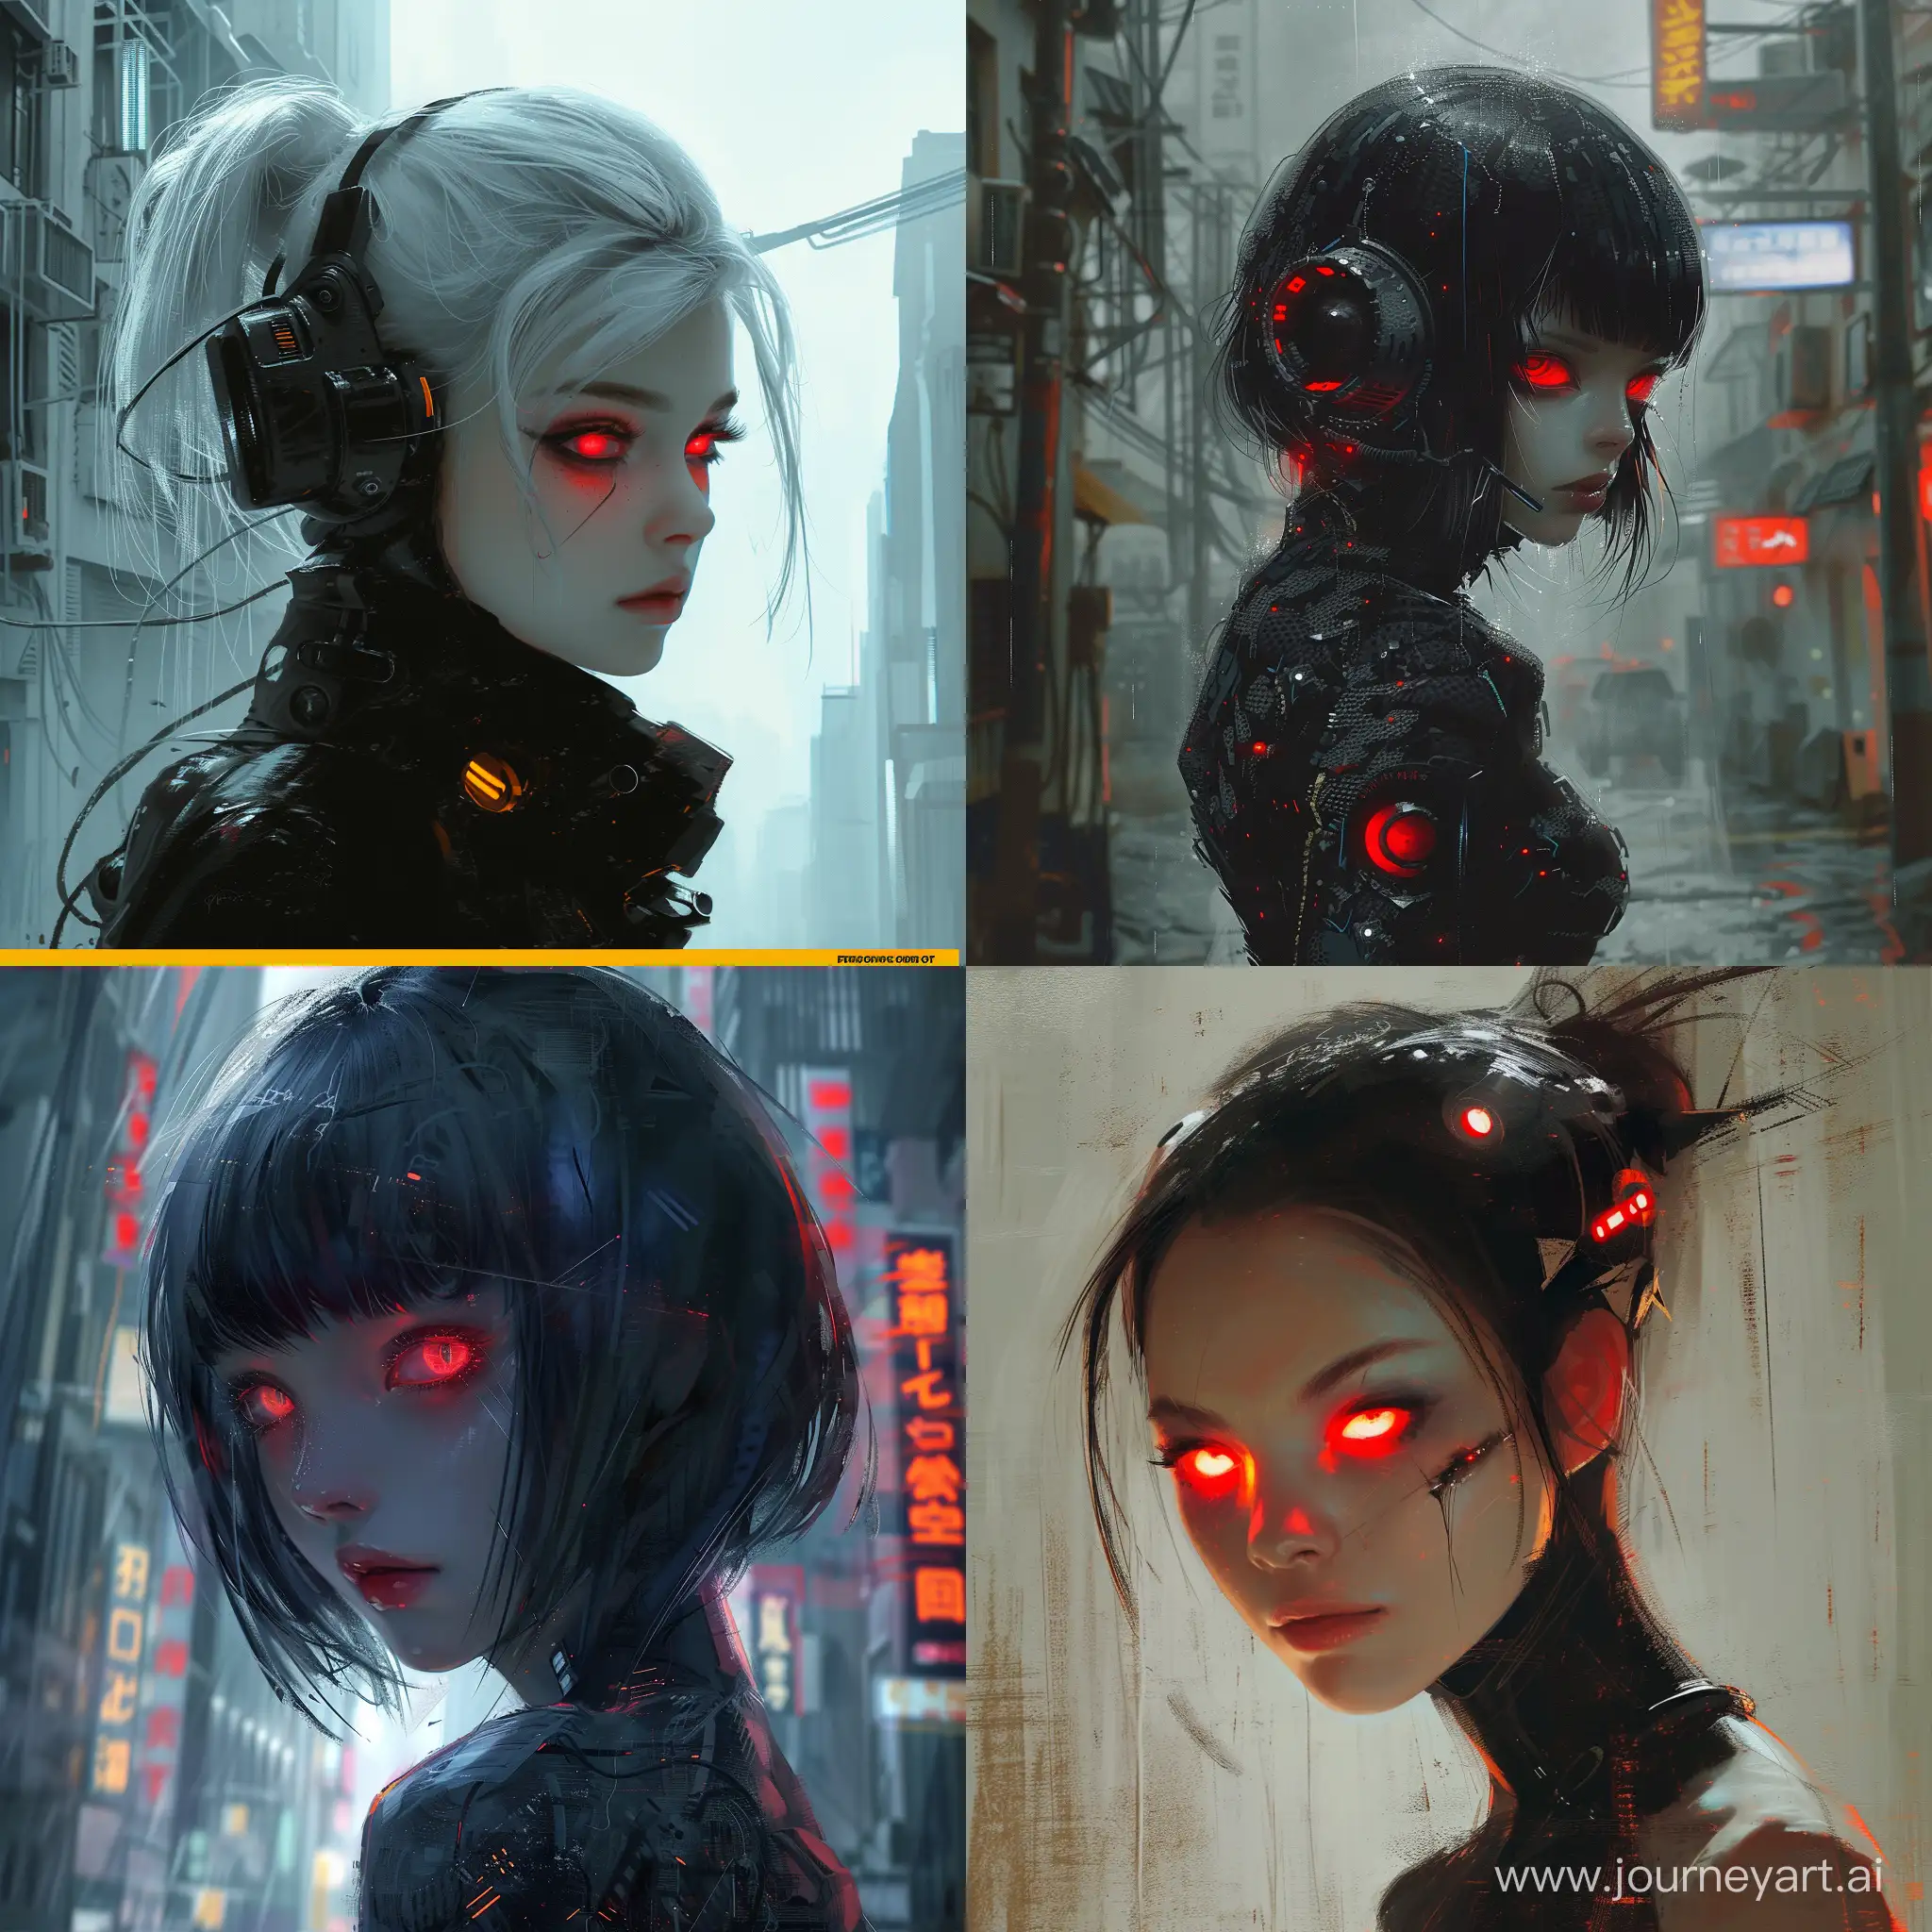 Futuristic-Cyberpunk-Girl-Strolling-with-Striking-Red-Eyes-and-Trendsetting-Hairstyle